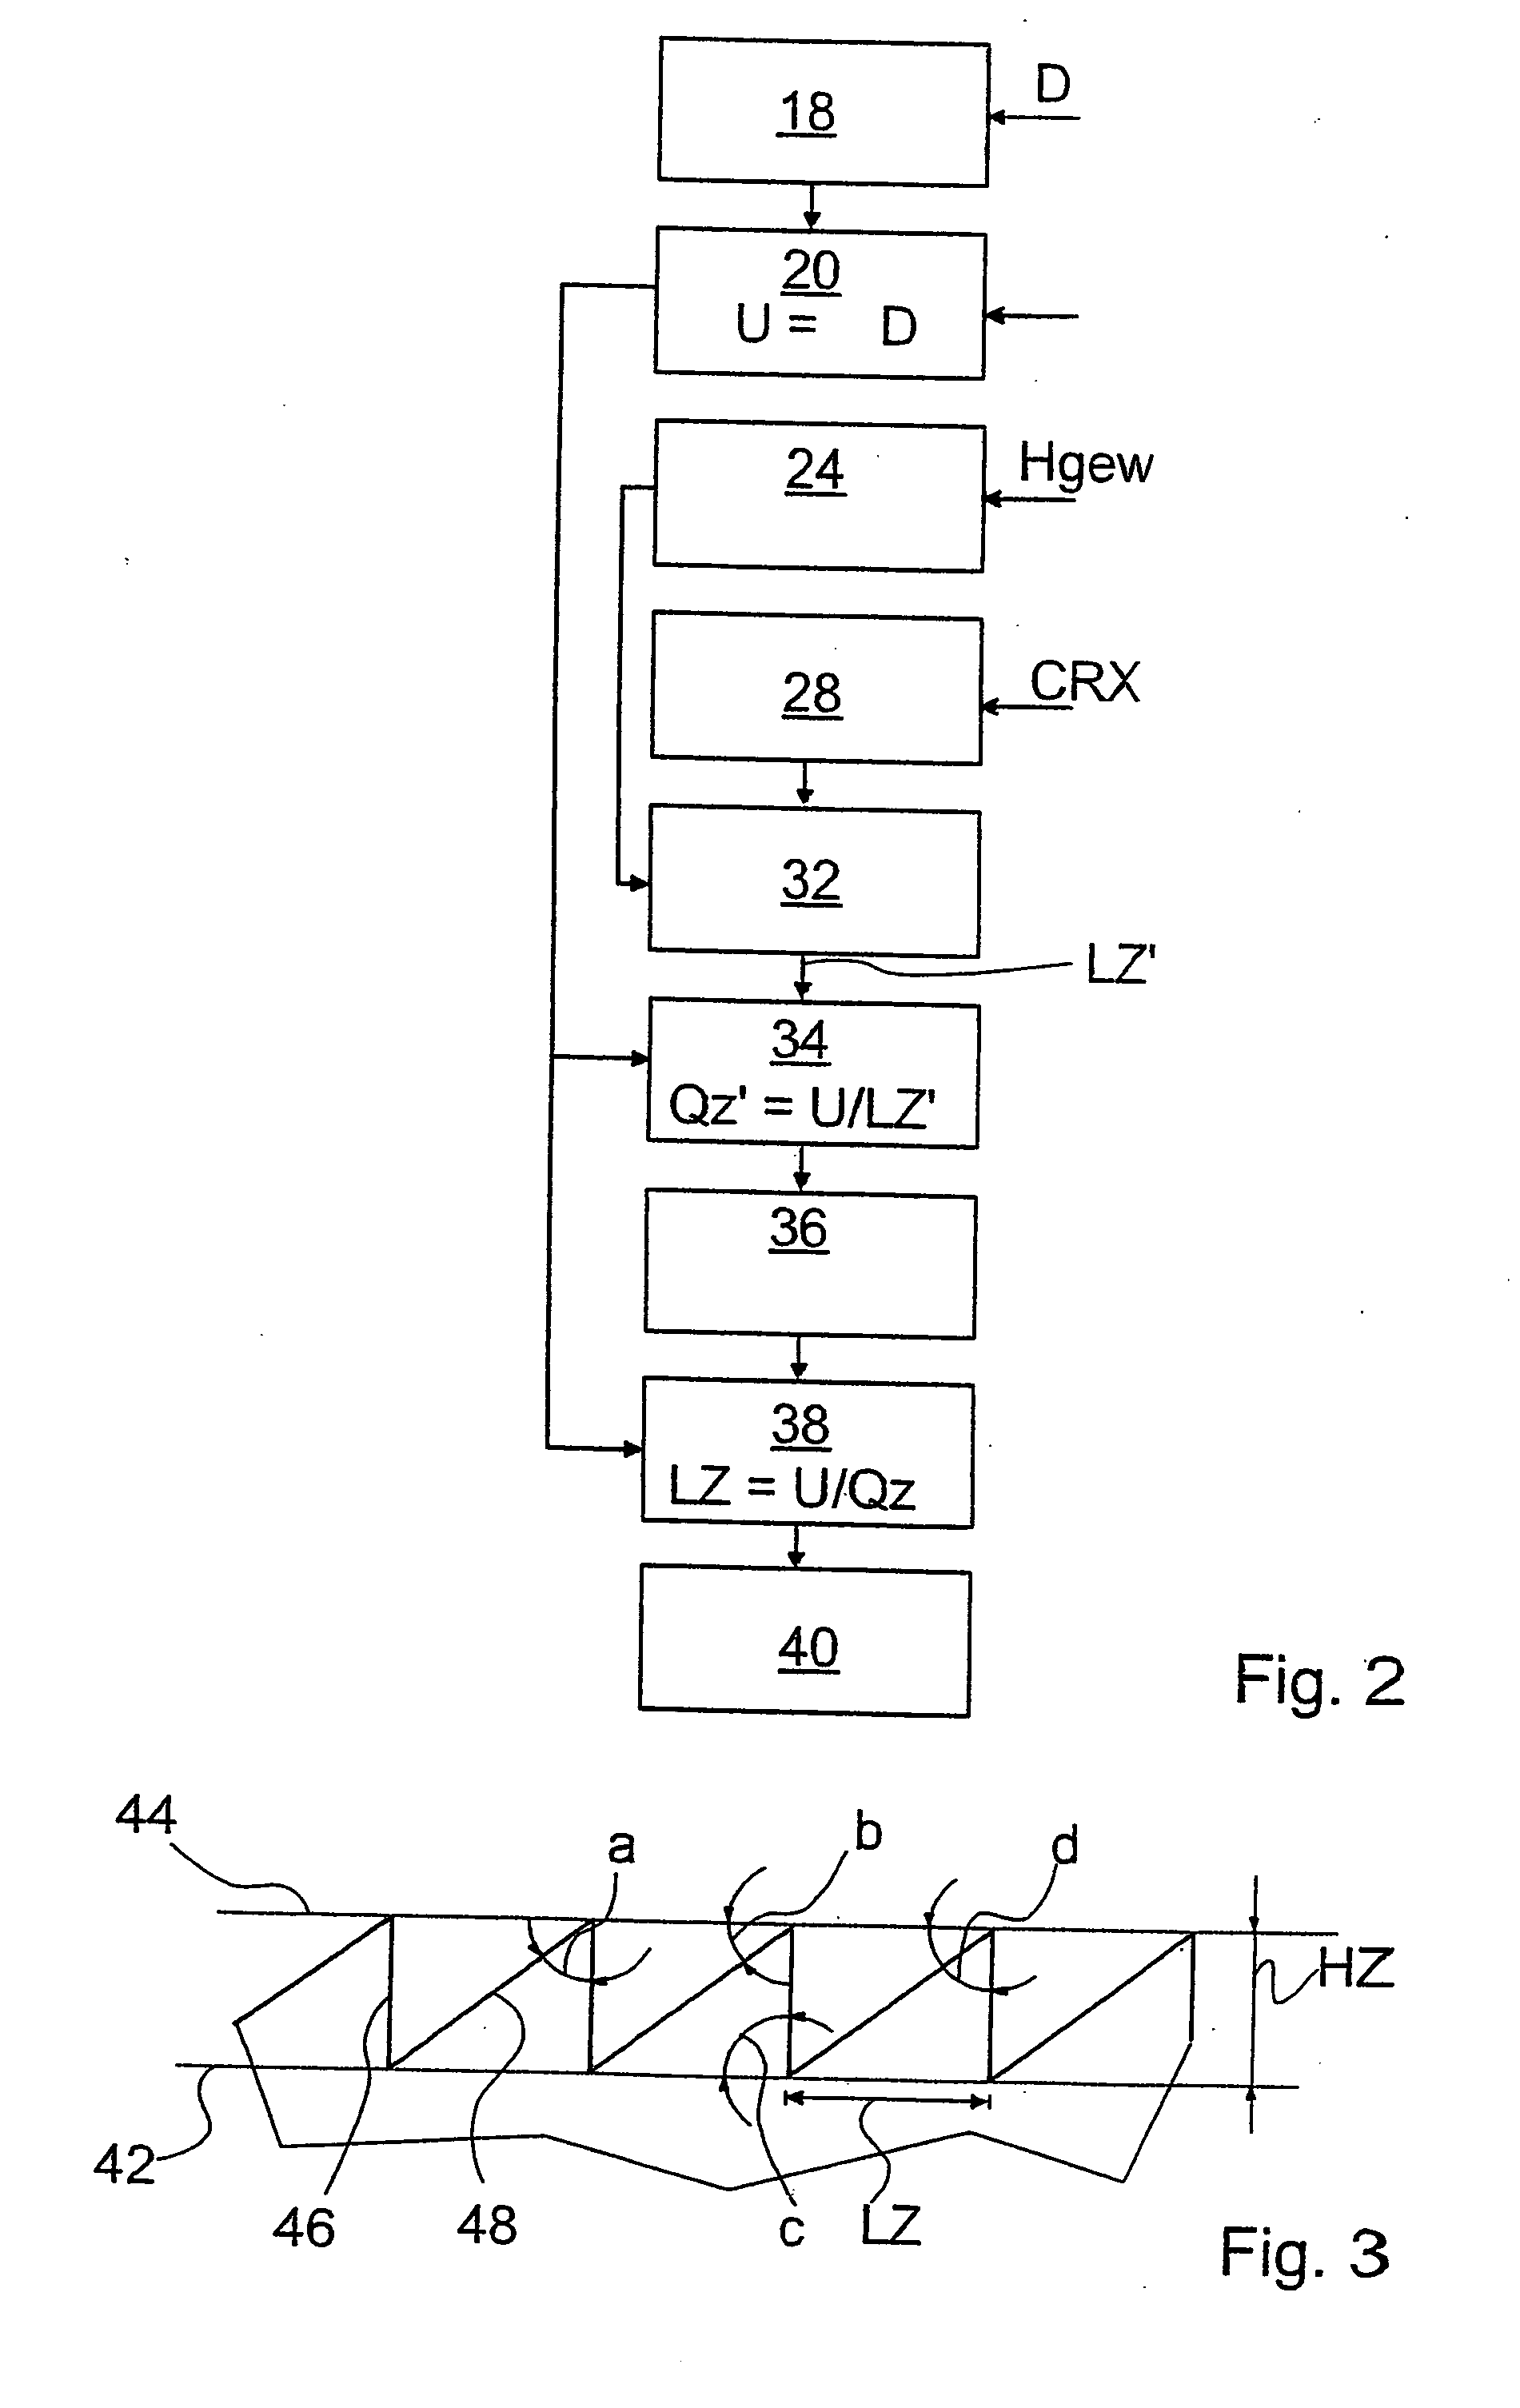 Method for determining a tooth period length of a bone milling cutter